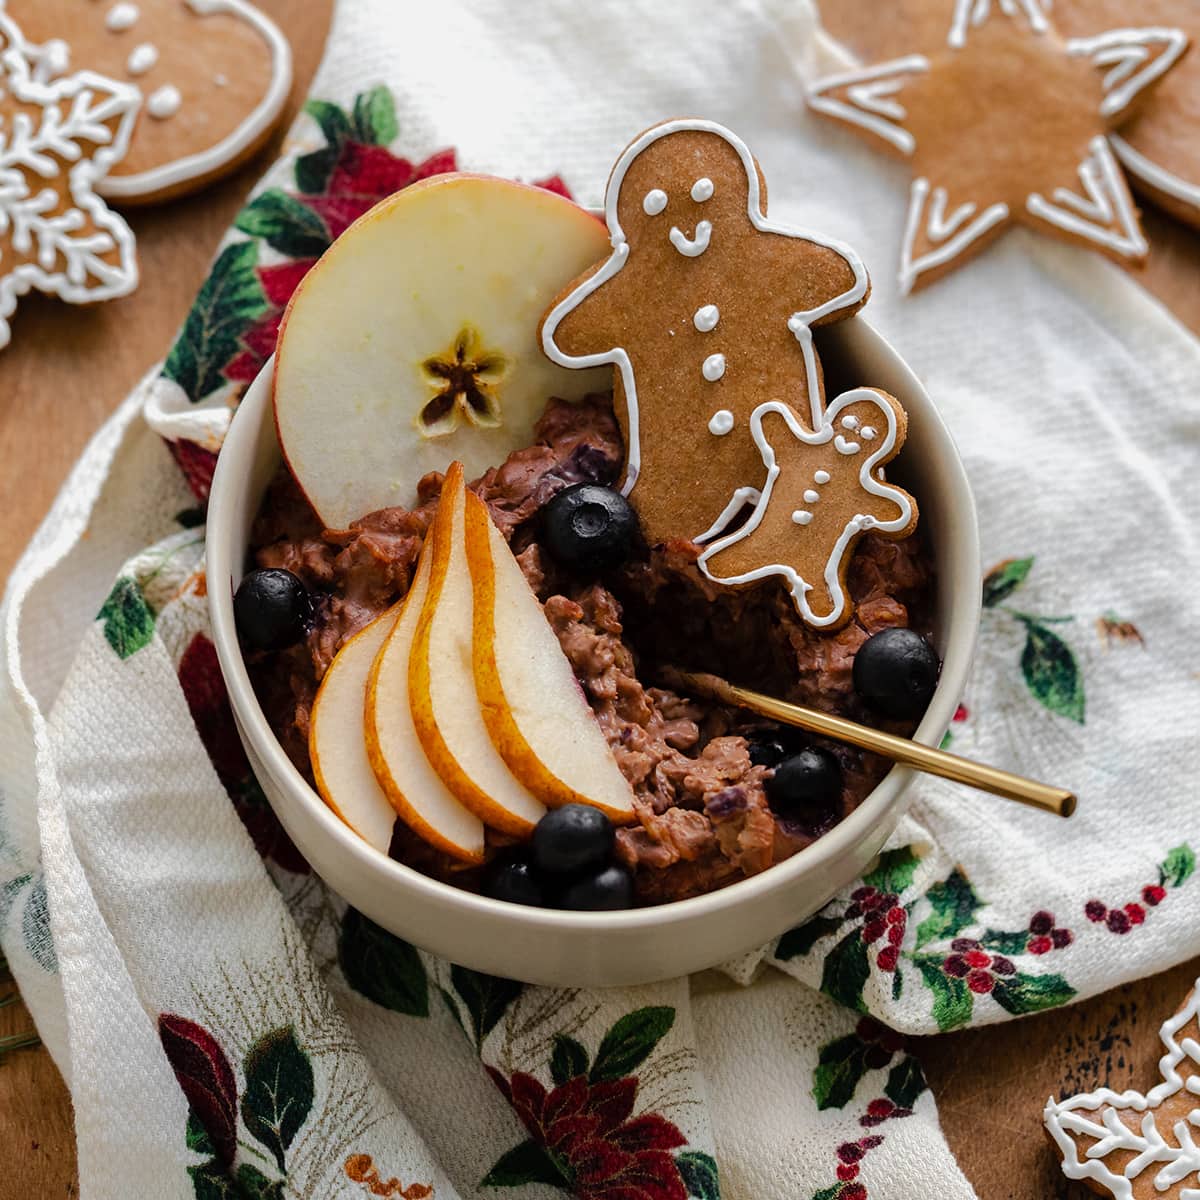 A square shot of Gingerbread oatmeal in a beige bowl garnished with sliced pear, a slice of apple, a few blueberries, and two gingrbread men. On light wooden background with a christmas tea towel under the bowl and gingerbread cookies around it.